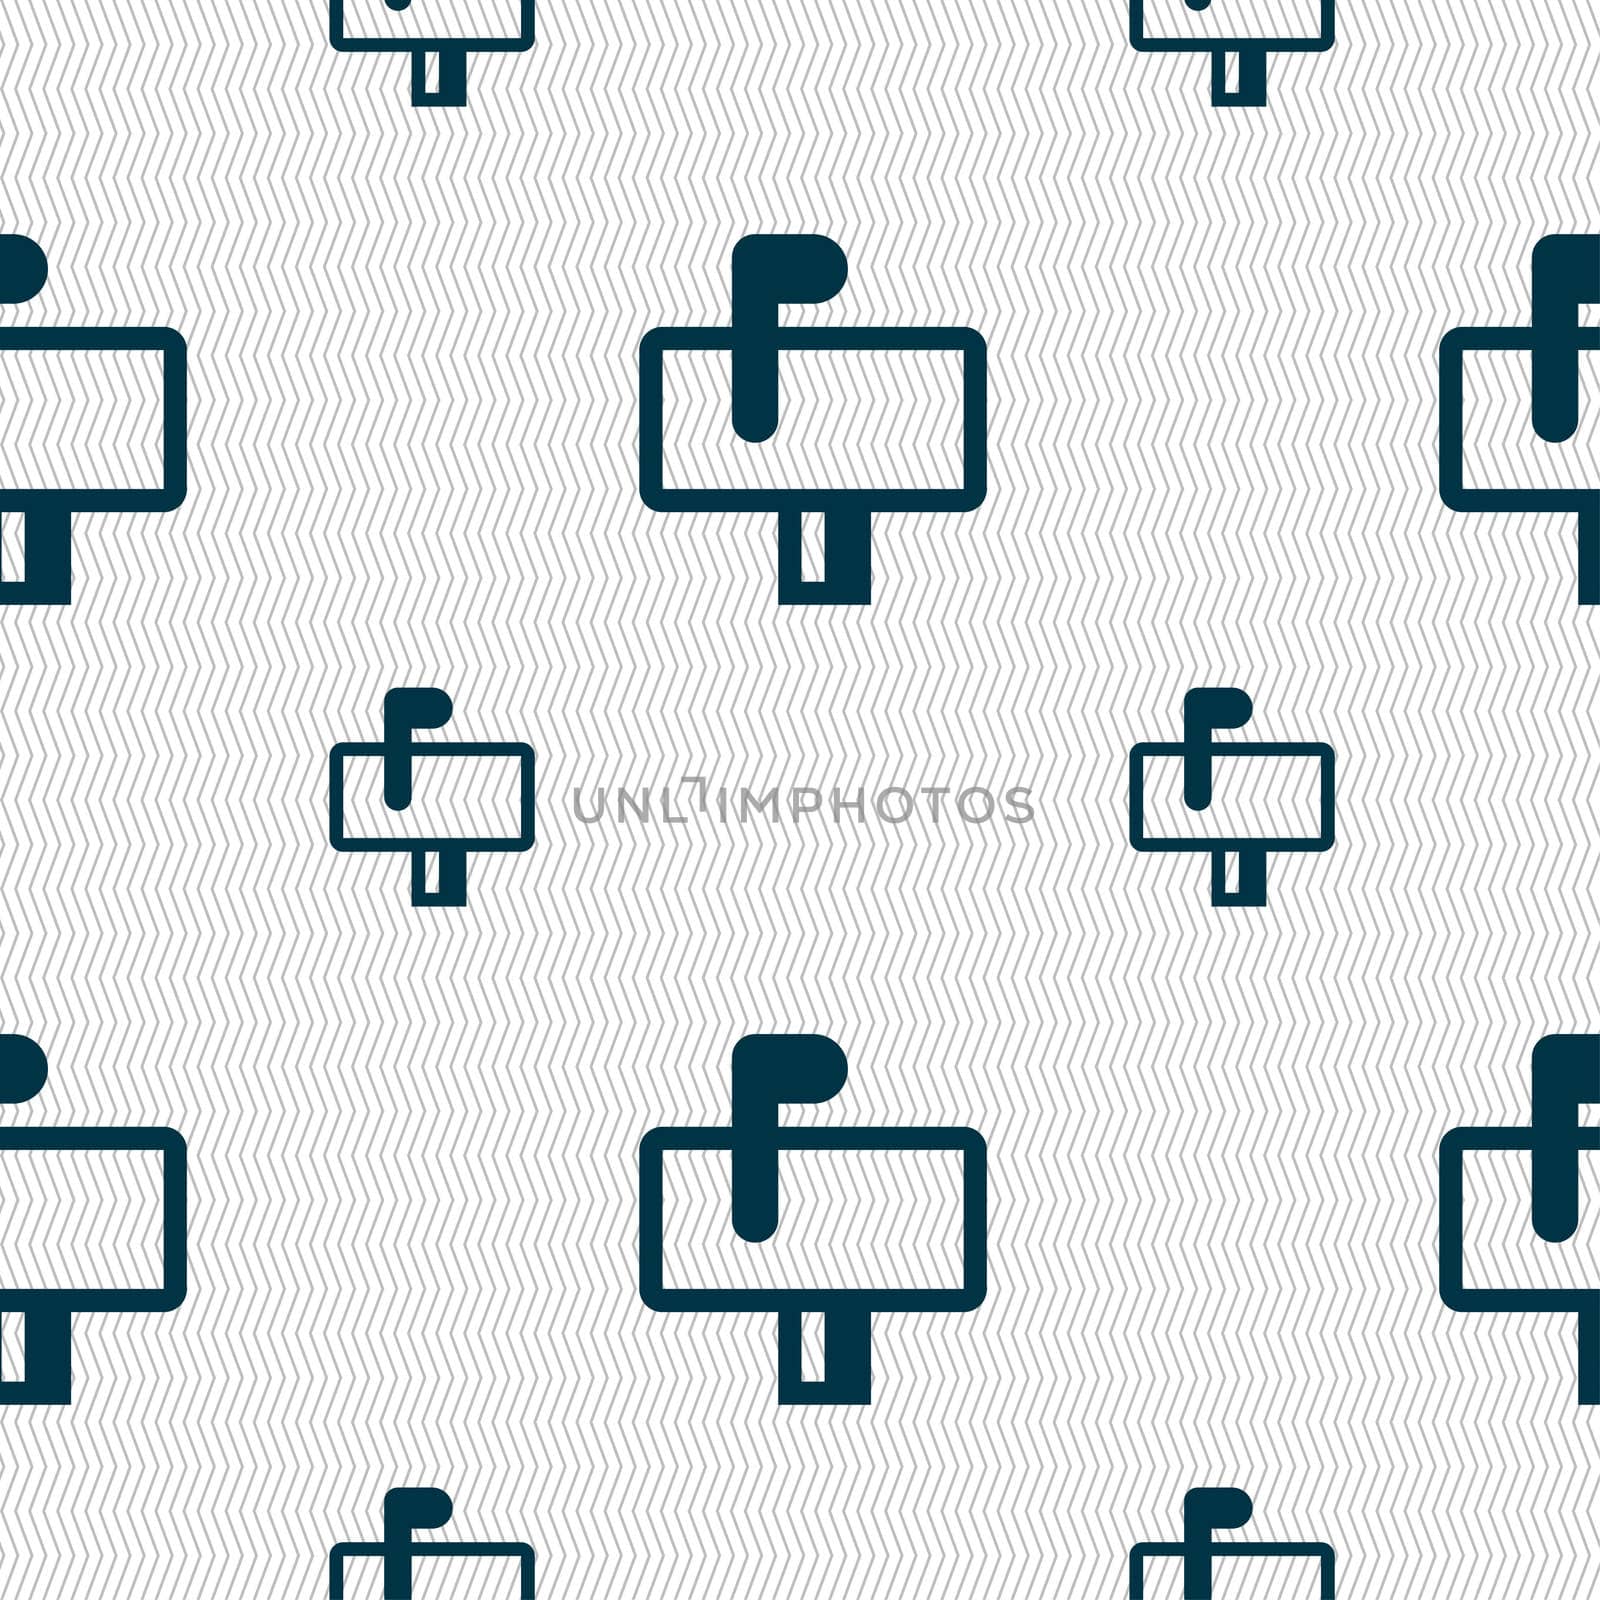 Mailbox icon sign. Seamless pattern with geometric texture. illustration